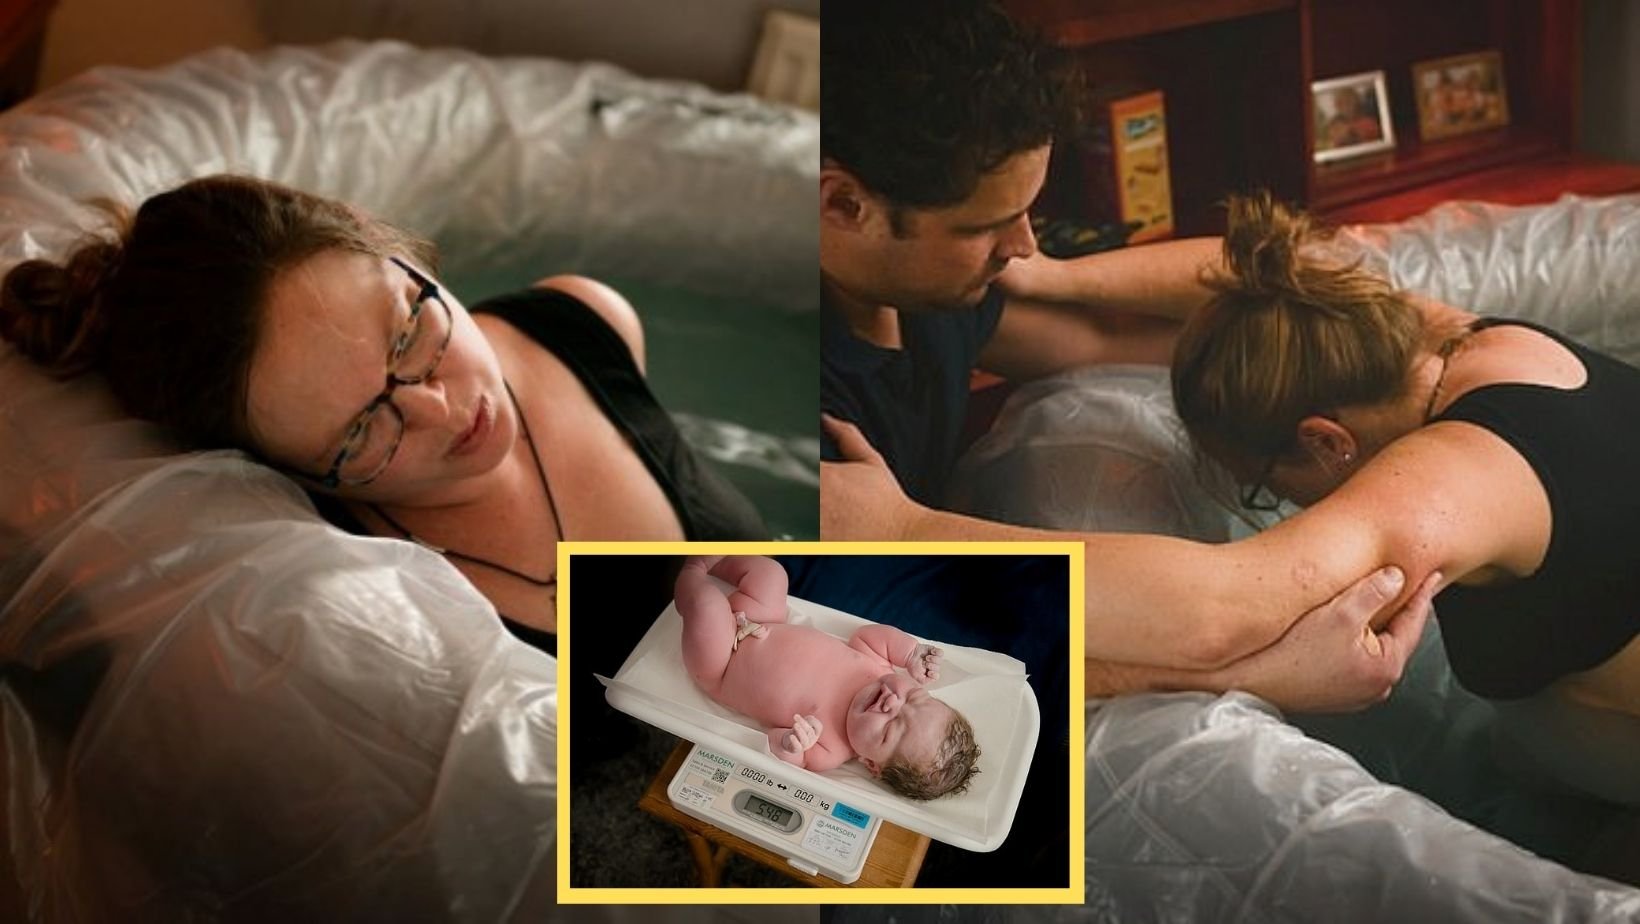 1 89.jpg?resize=1200,630 - Mother Delivers 12lbs Baby Girl NATURALLY At Her Home & Claims It Was A 'Calm' Experience